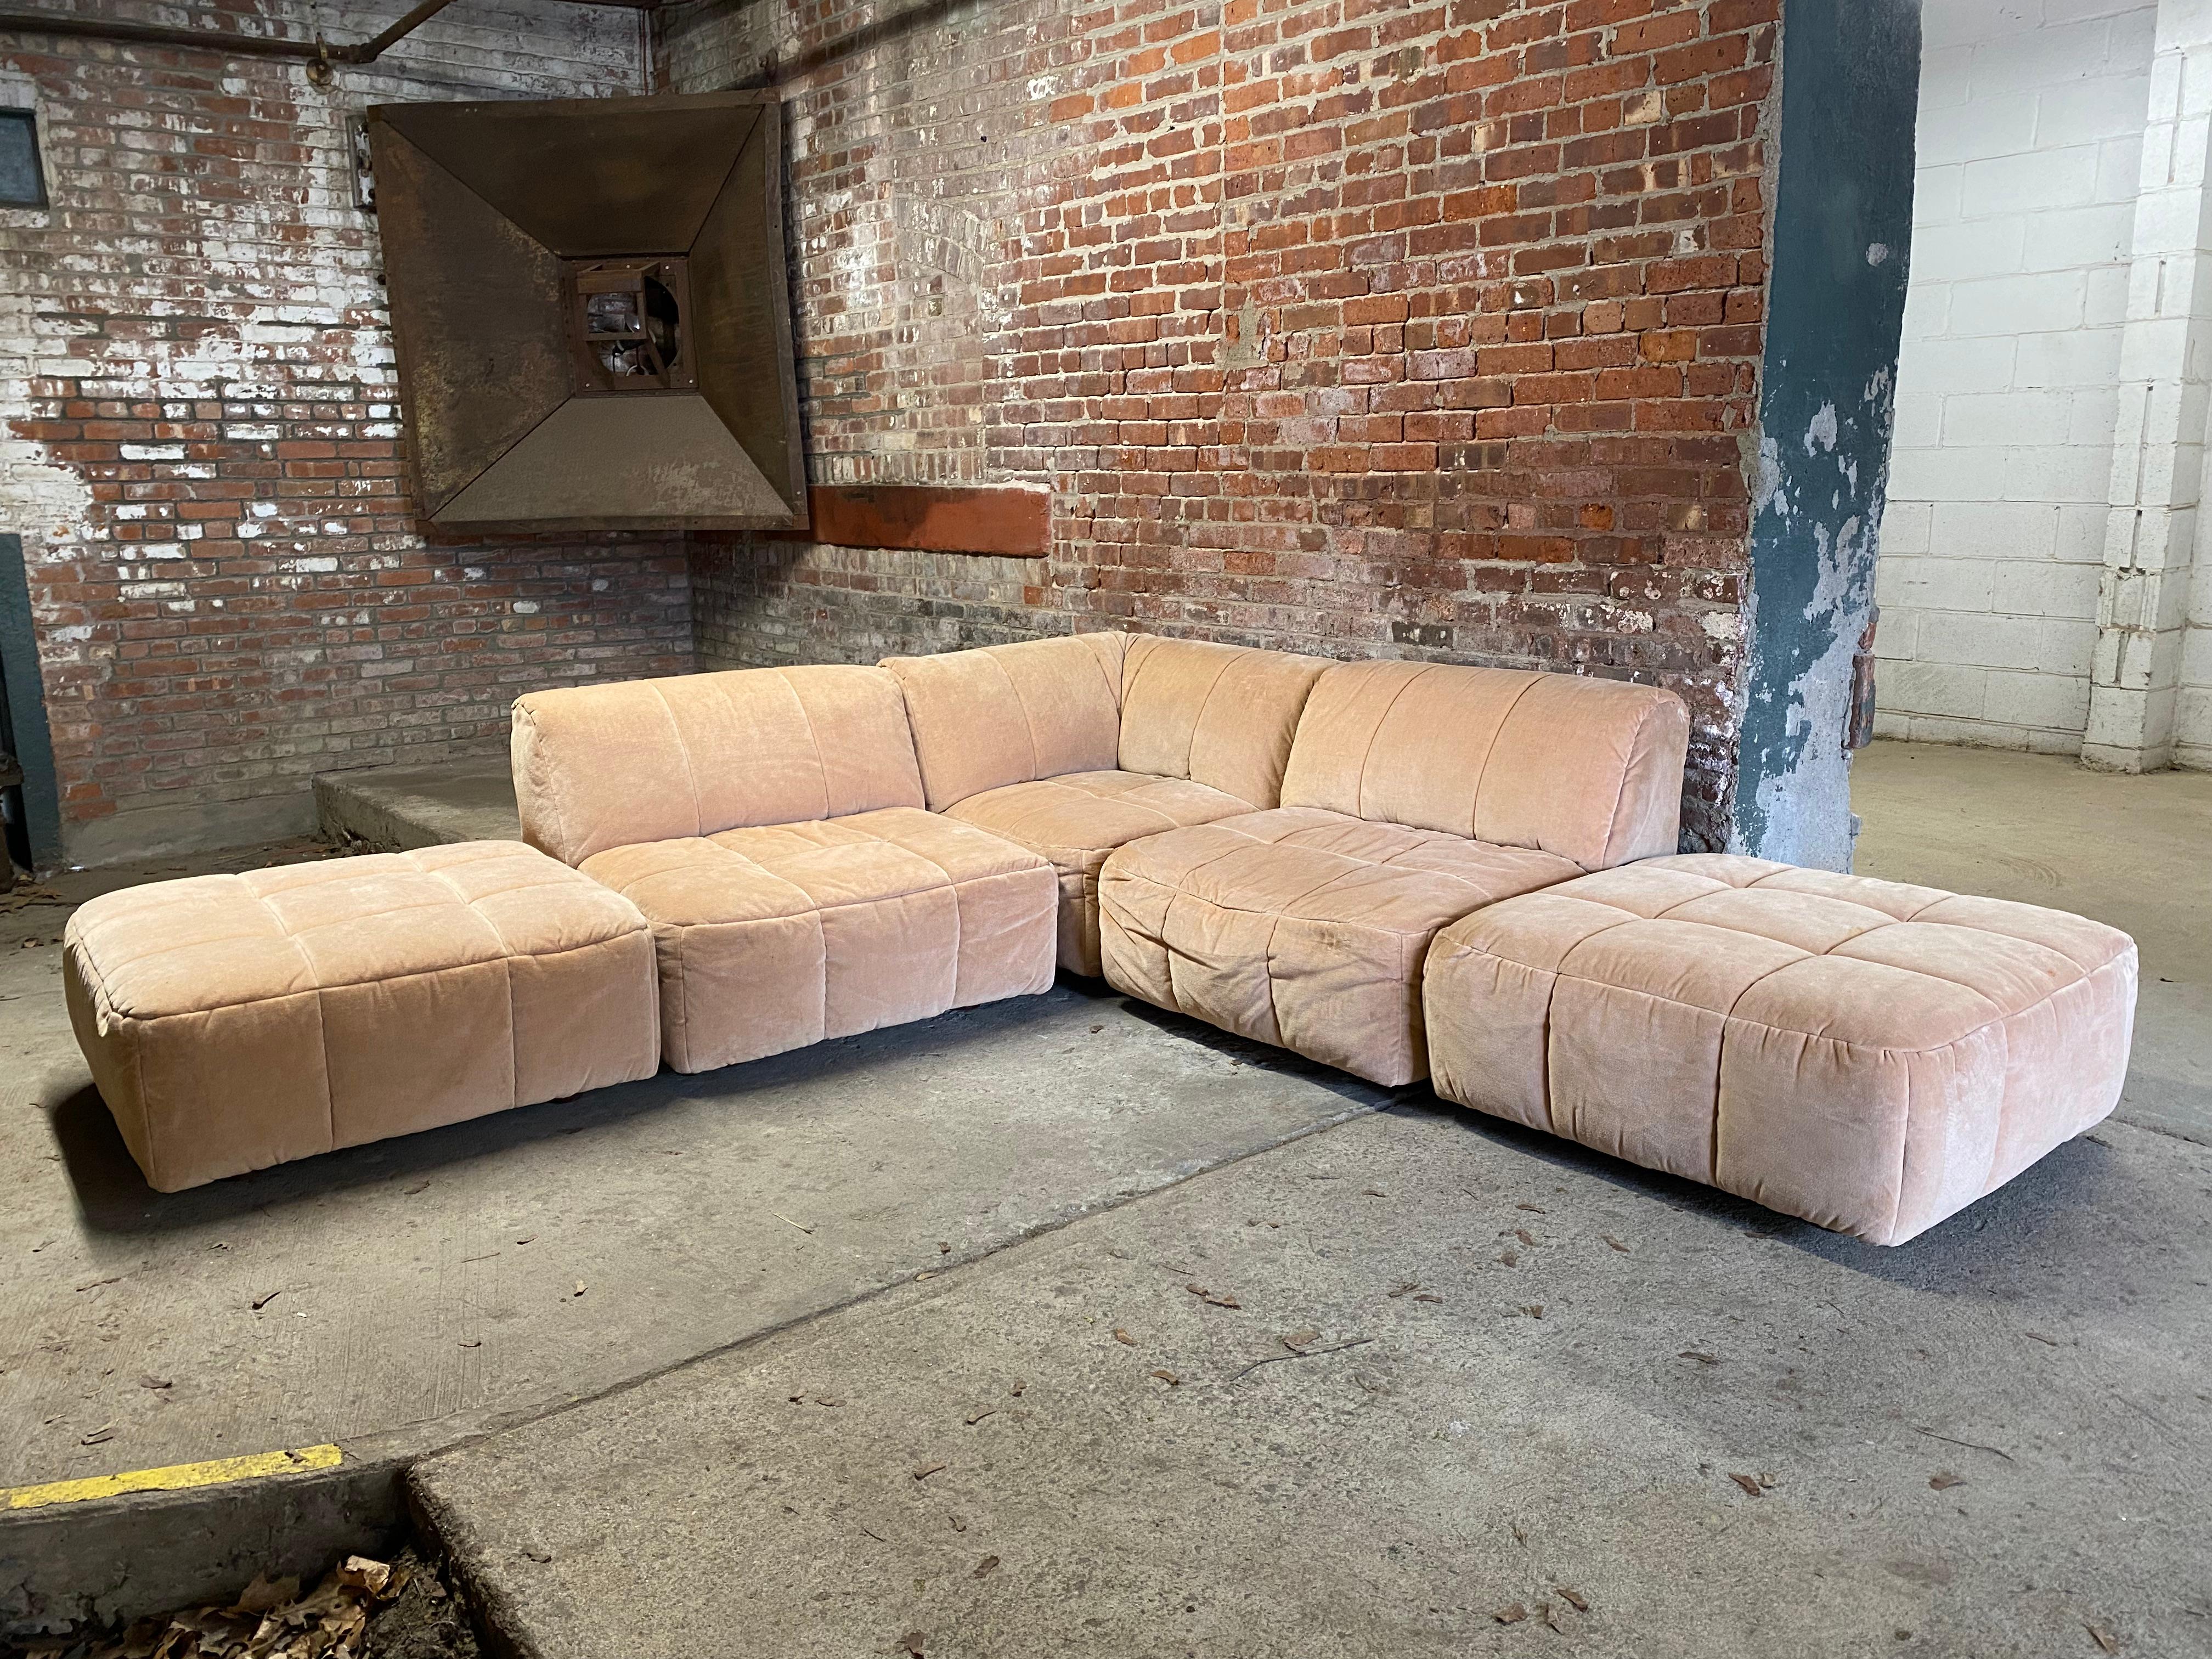 Five piece Pierre Cardin modular sofa. Multiple configurations and very comfortable. The set consists of: 2 ottomans, 2 armless chairs and 1 corner chair. Original velvety peach upholstery. Removable screw in wood feet. Some pieces still retain the